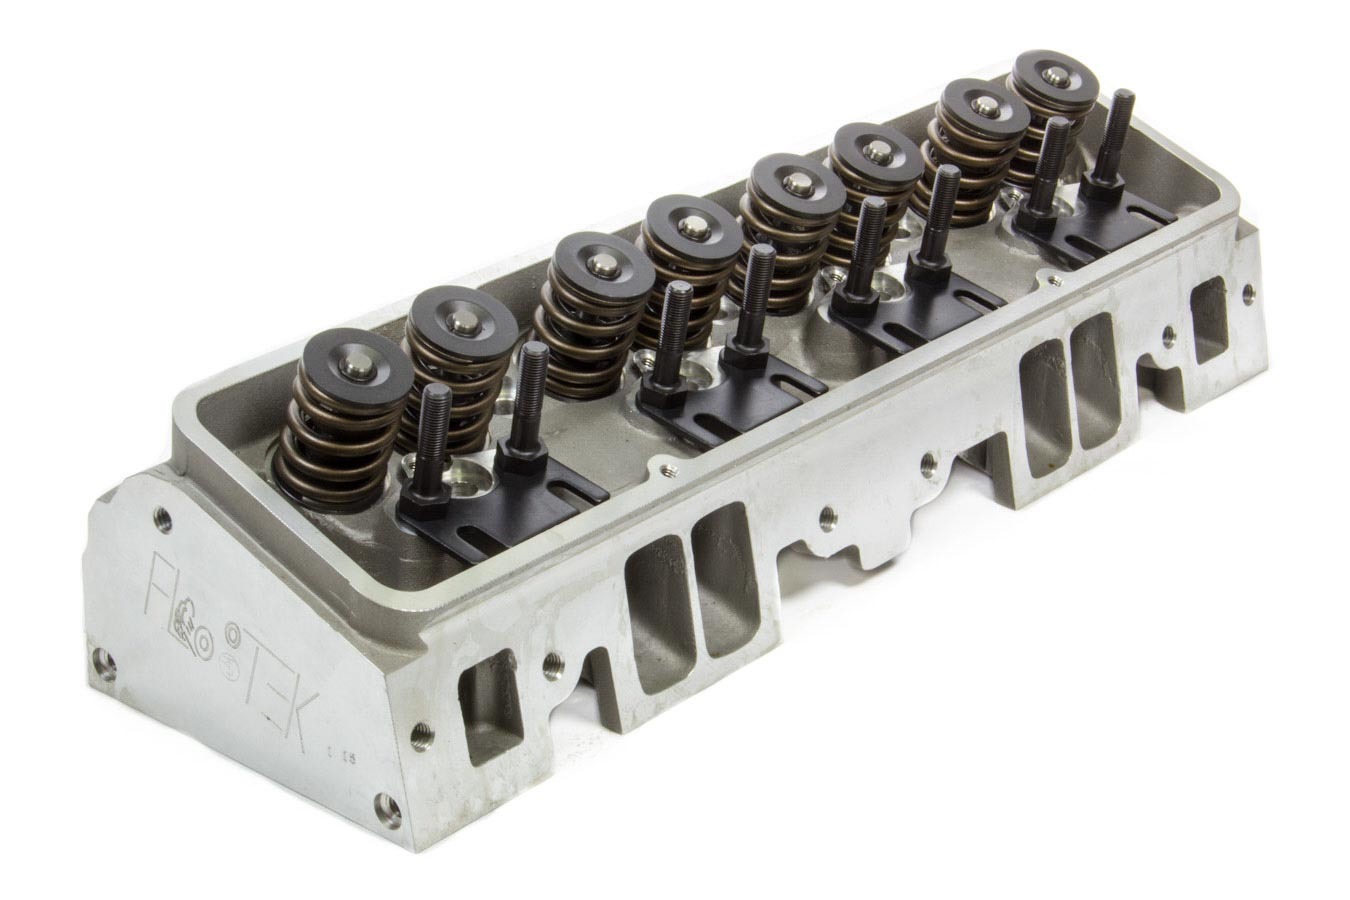 Flo Tek 102505 Cylinder Head, Assembled, 2.020 / 1.600 in Valves, 180 cc Intake, 64 cc Chamber, 1.460 in Springs, Straight Plug, Aluminum, Small Block Chevy, Each